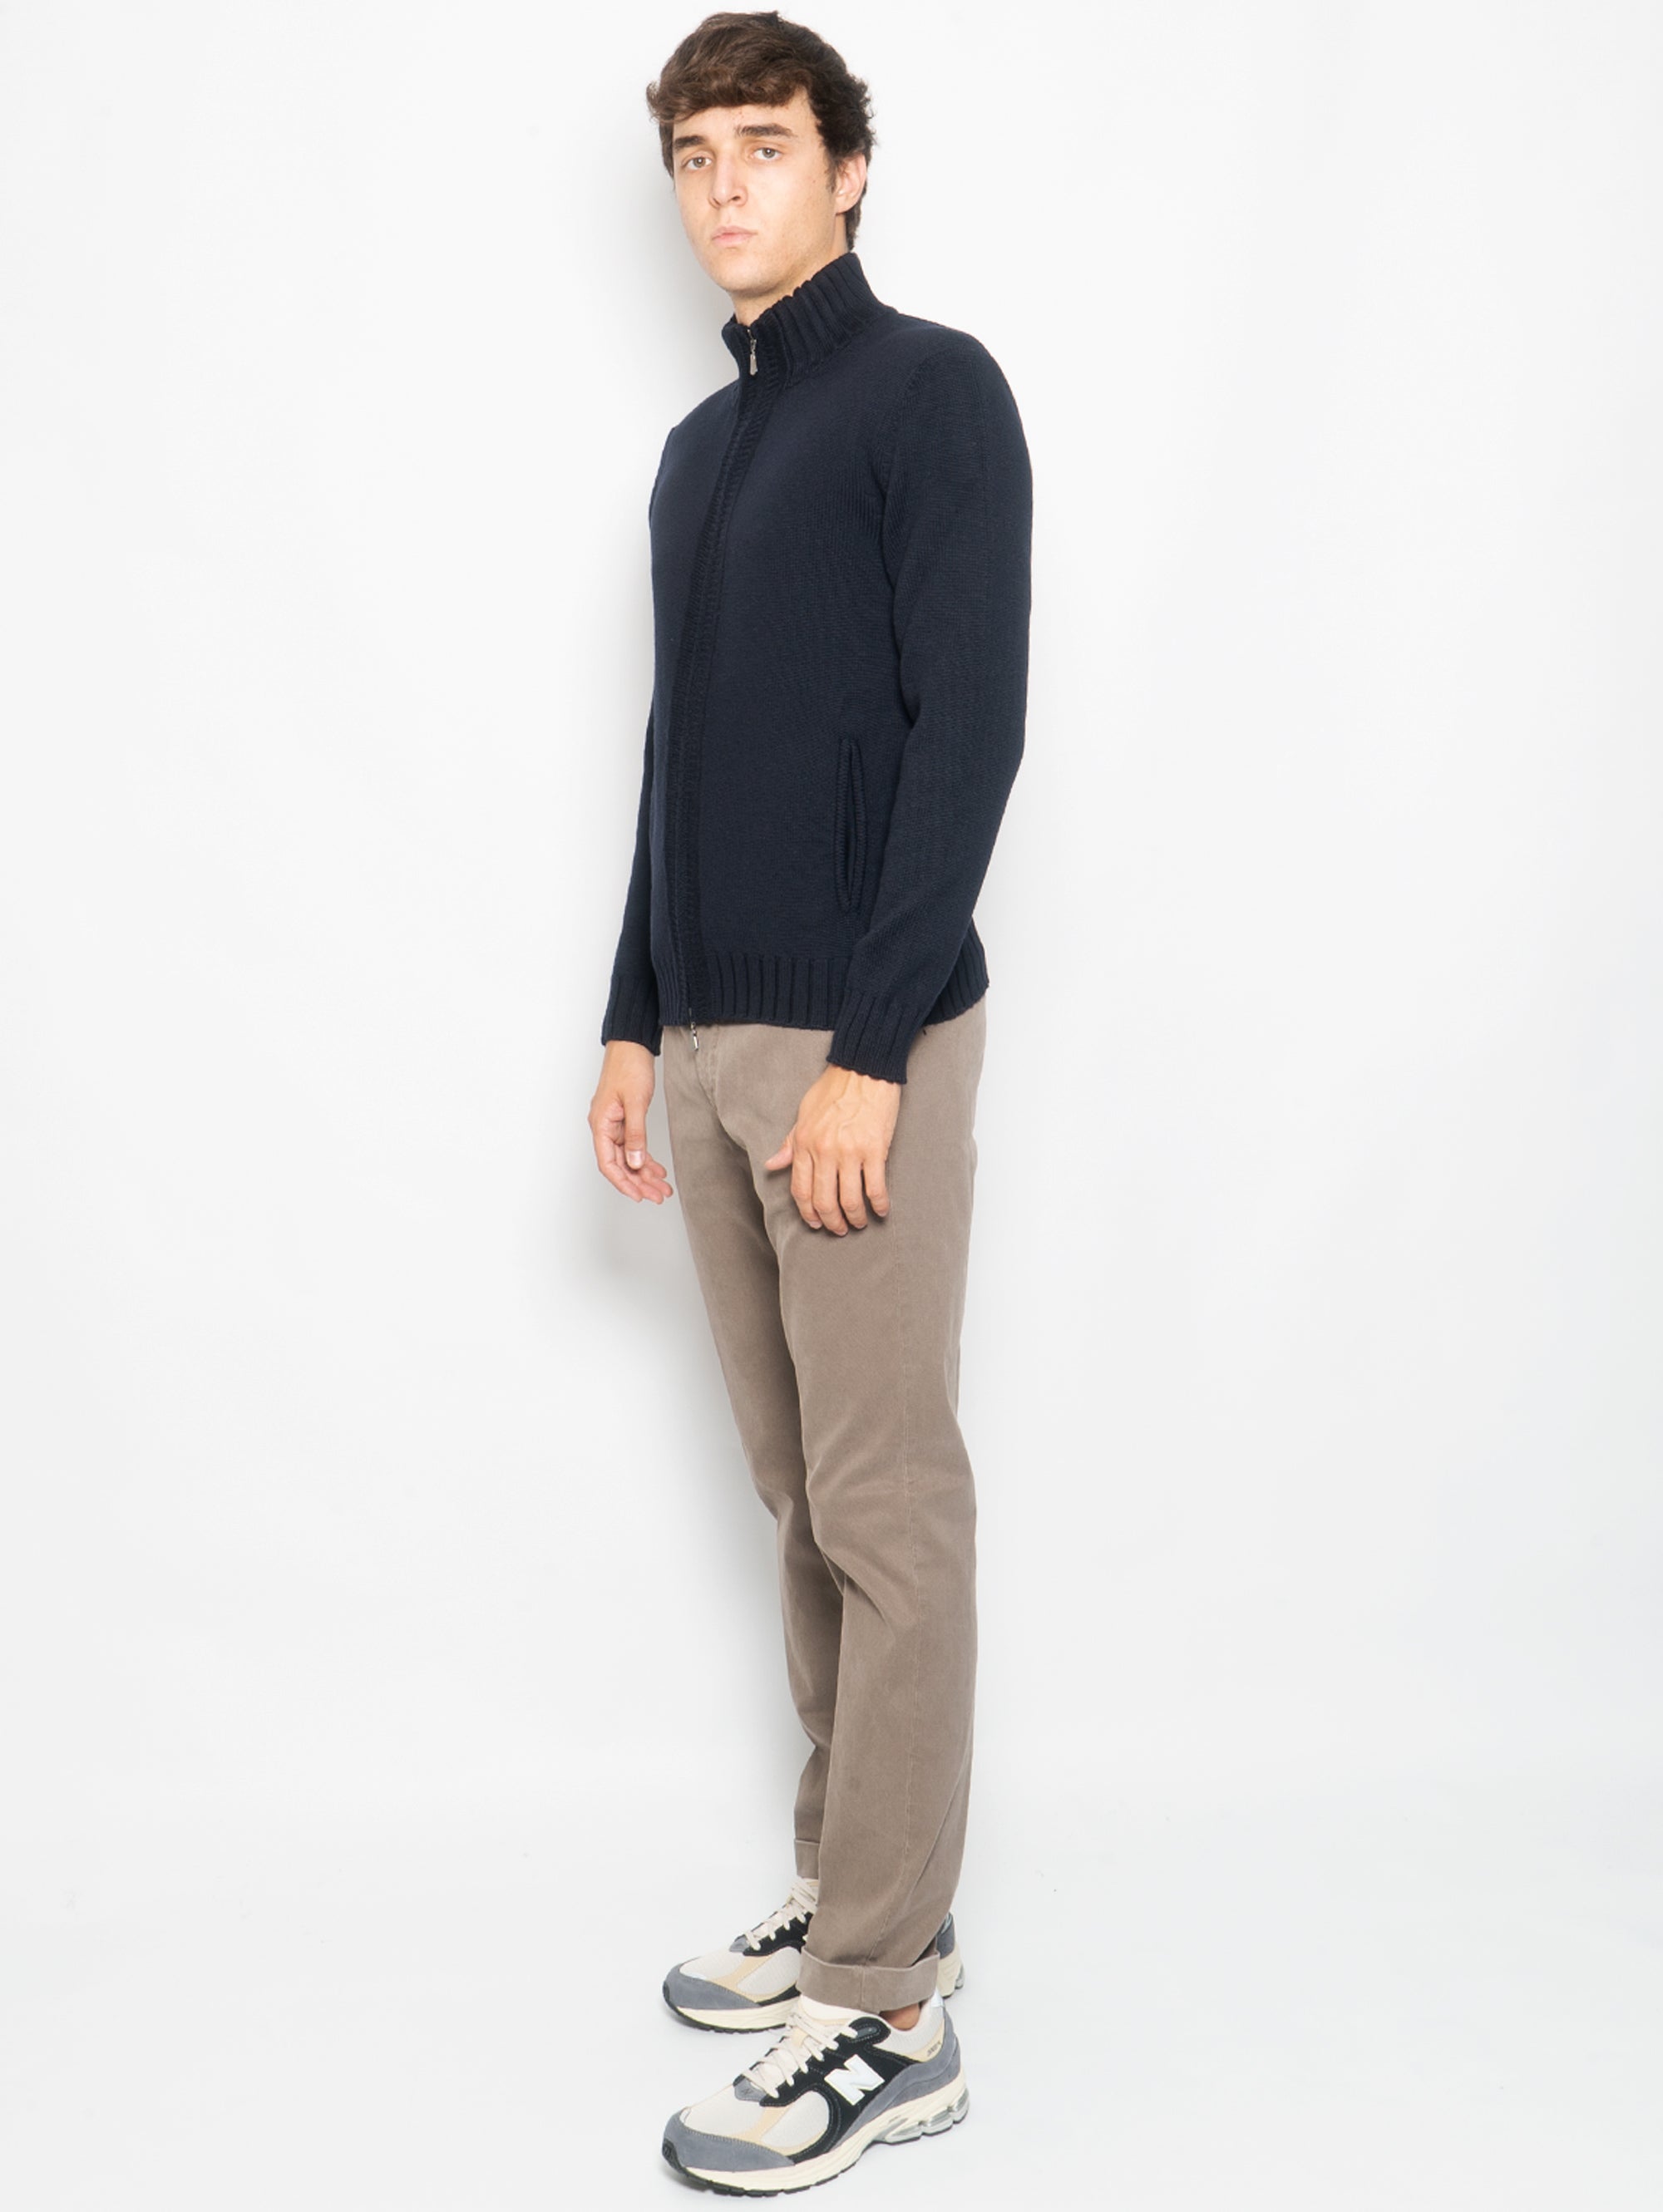 Chinos in Washed Dove Gray Textured Cotton